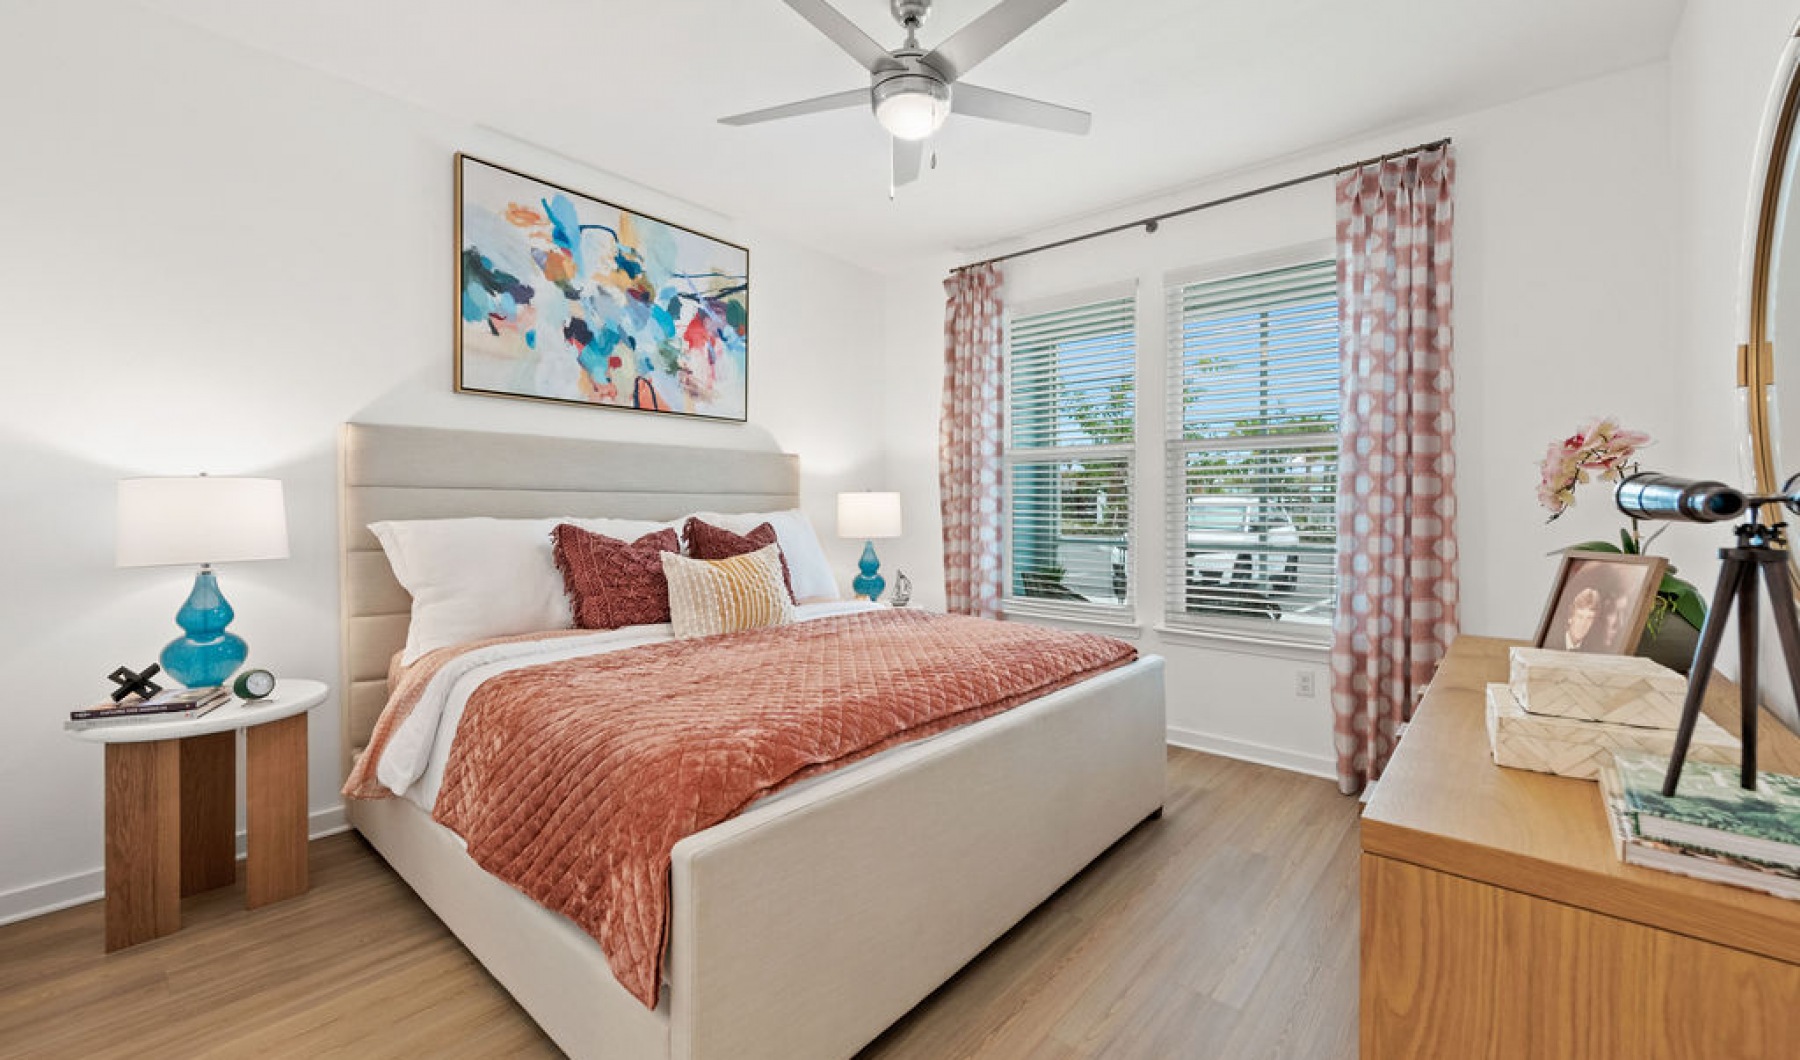 Funished Vida Lakewood Ranch's apartment bedroom with ceiling fans and large windows 